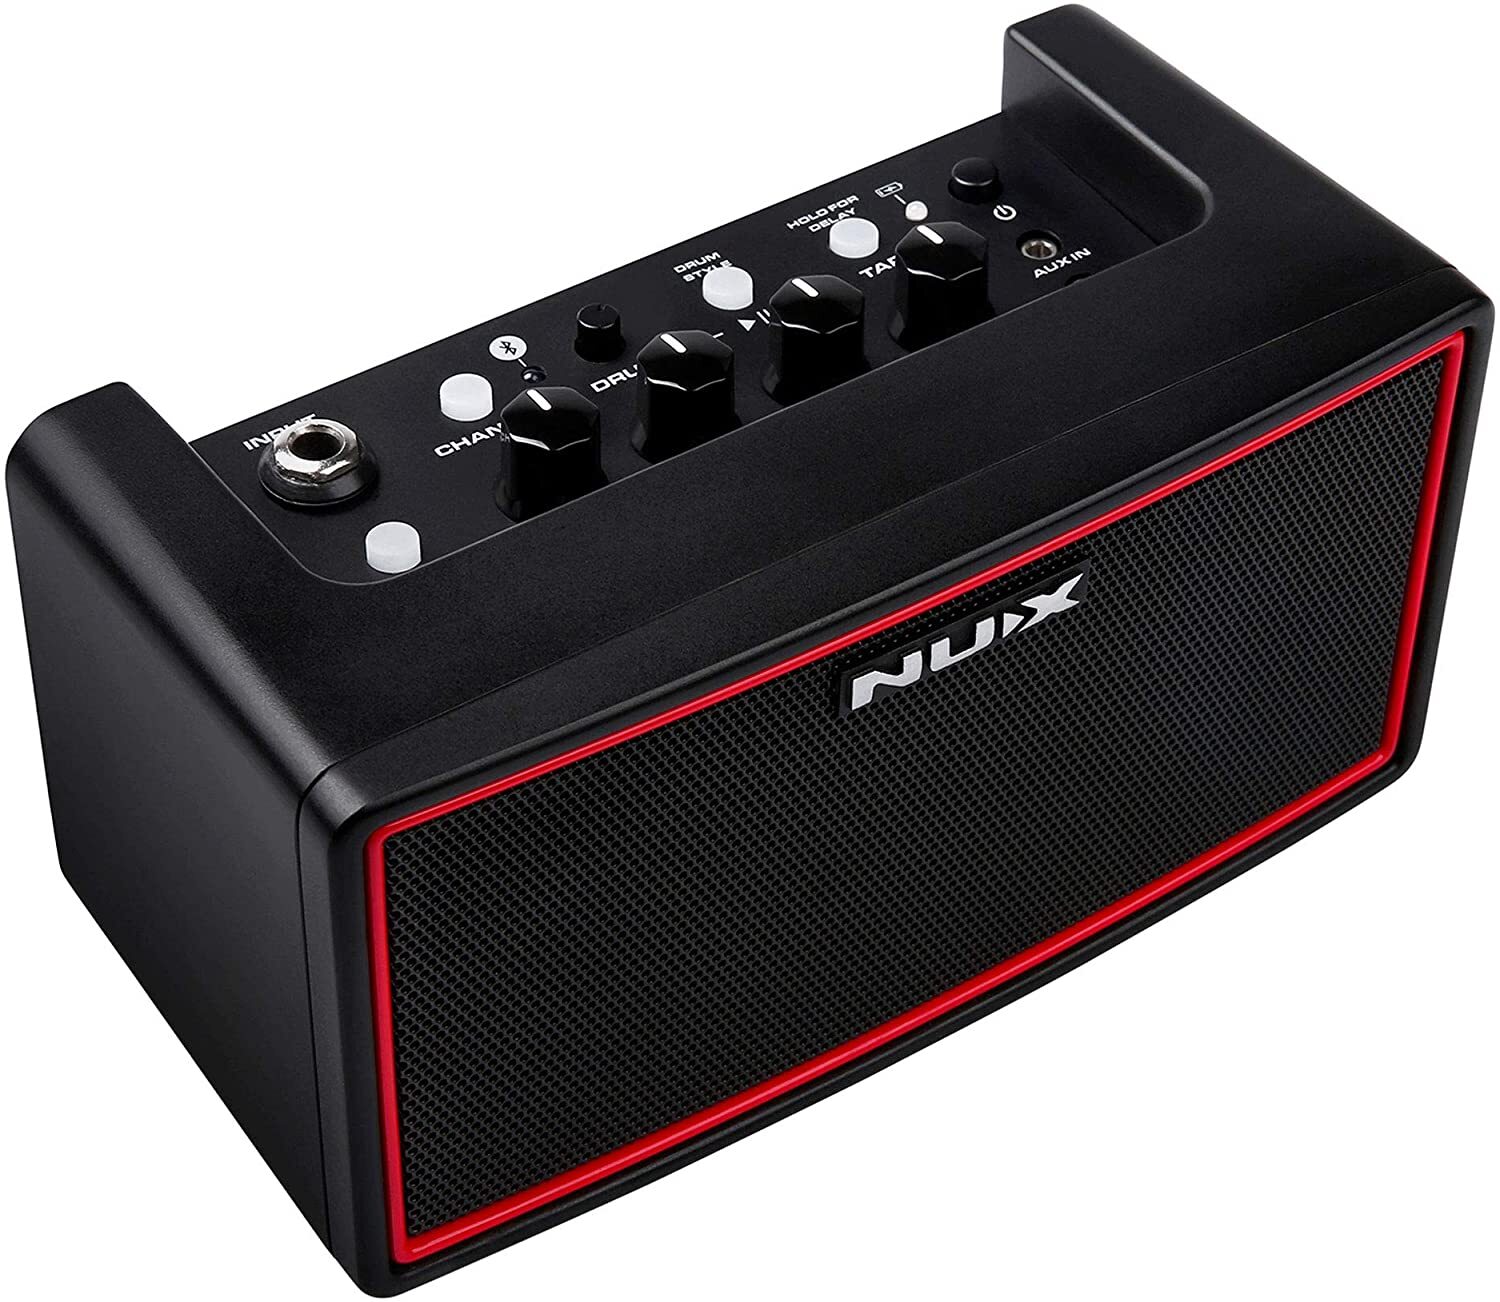 NUX Mighty Air Wireless Stereo Modeling Amplifier with Effects | SWAMP